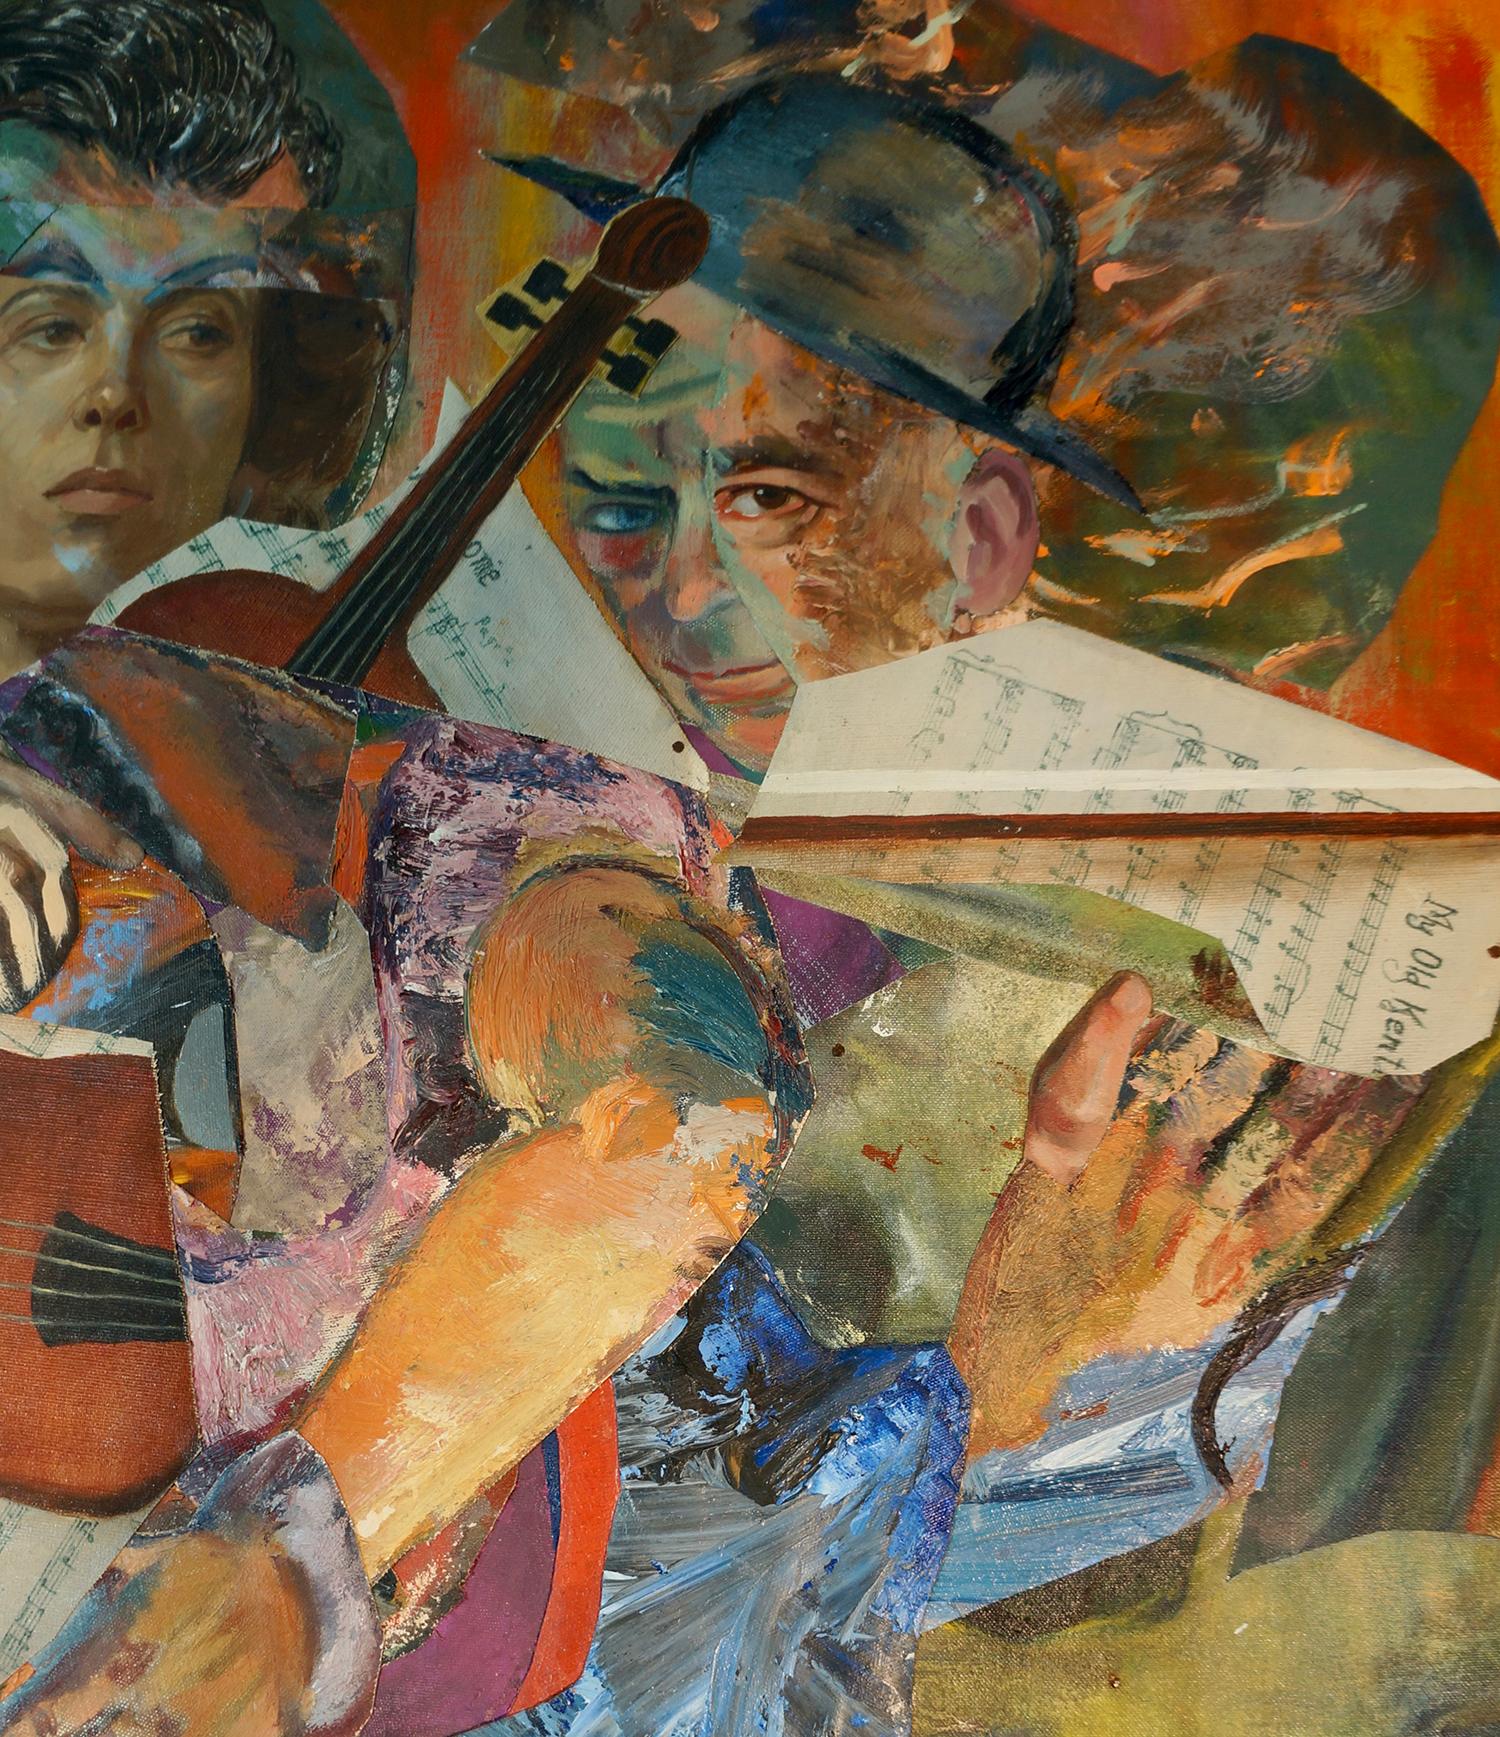 John Baker’s “Music Makers” is an acrylic painting on canvas with collage 30 inches x 40 inches in blues, oranges, pinks, yellows and browns. The image is accomplished in contrasting styles. The violin and sheet music are painted in a realistic